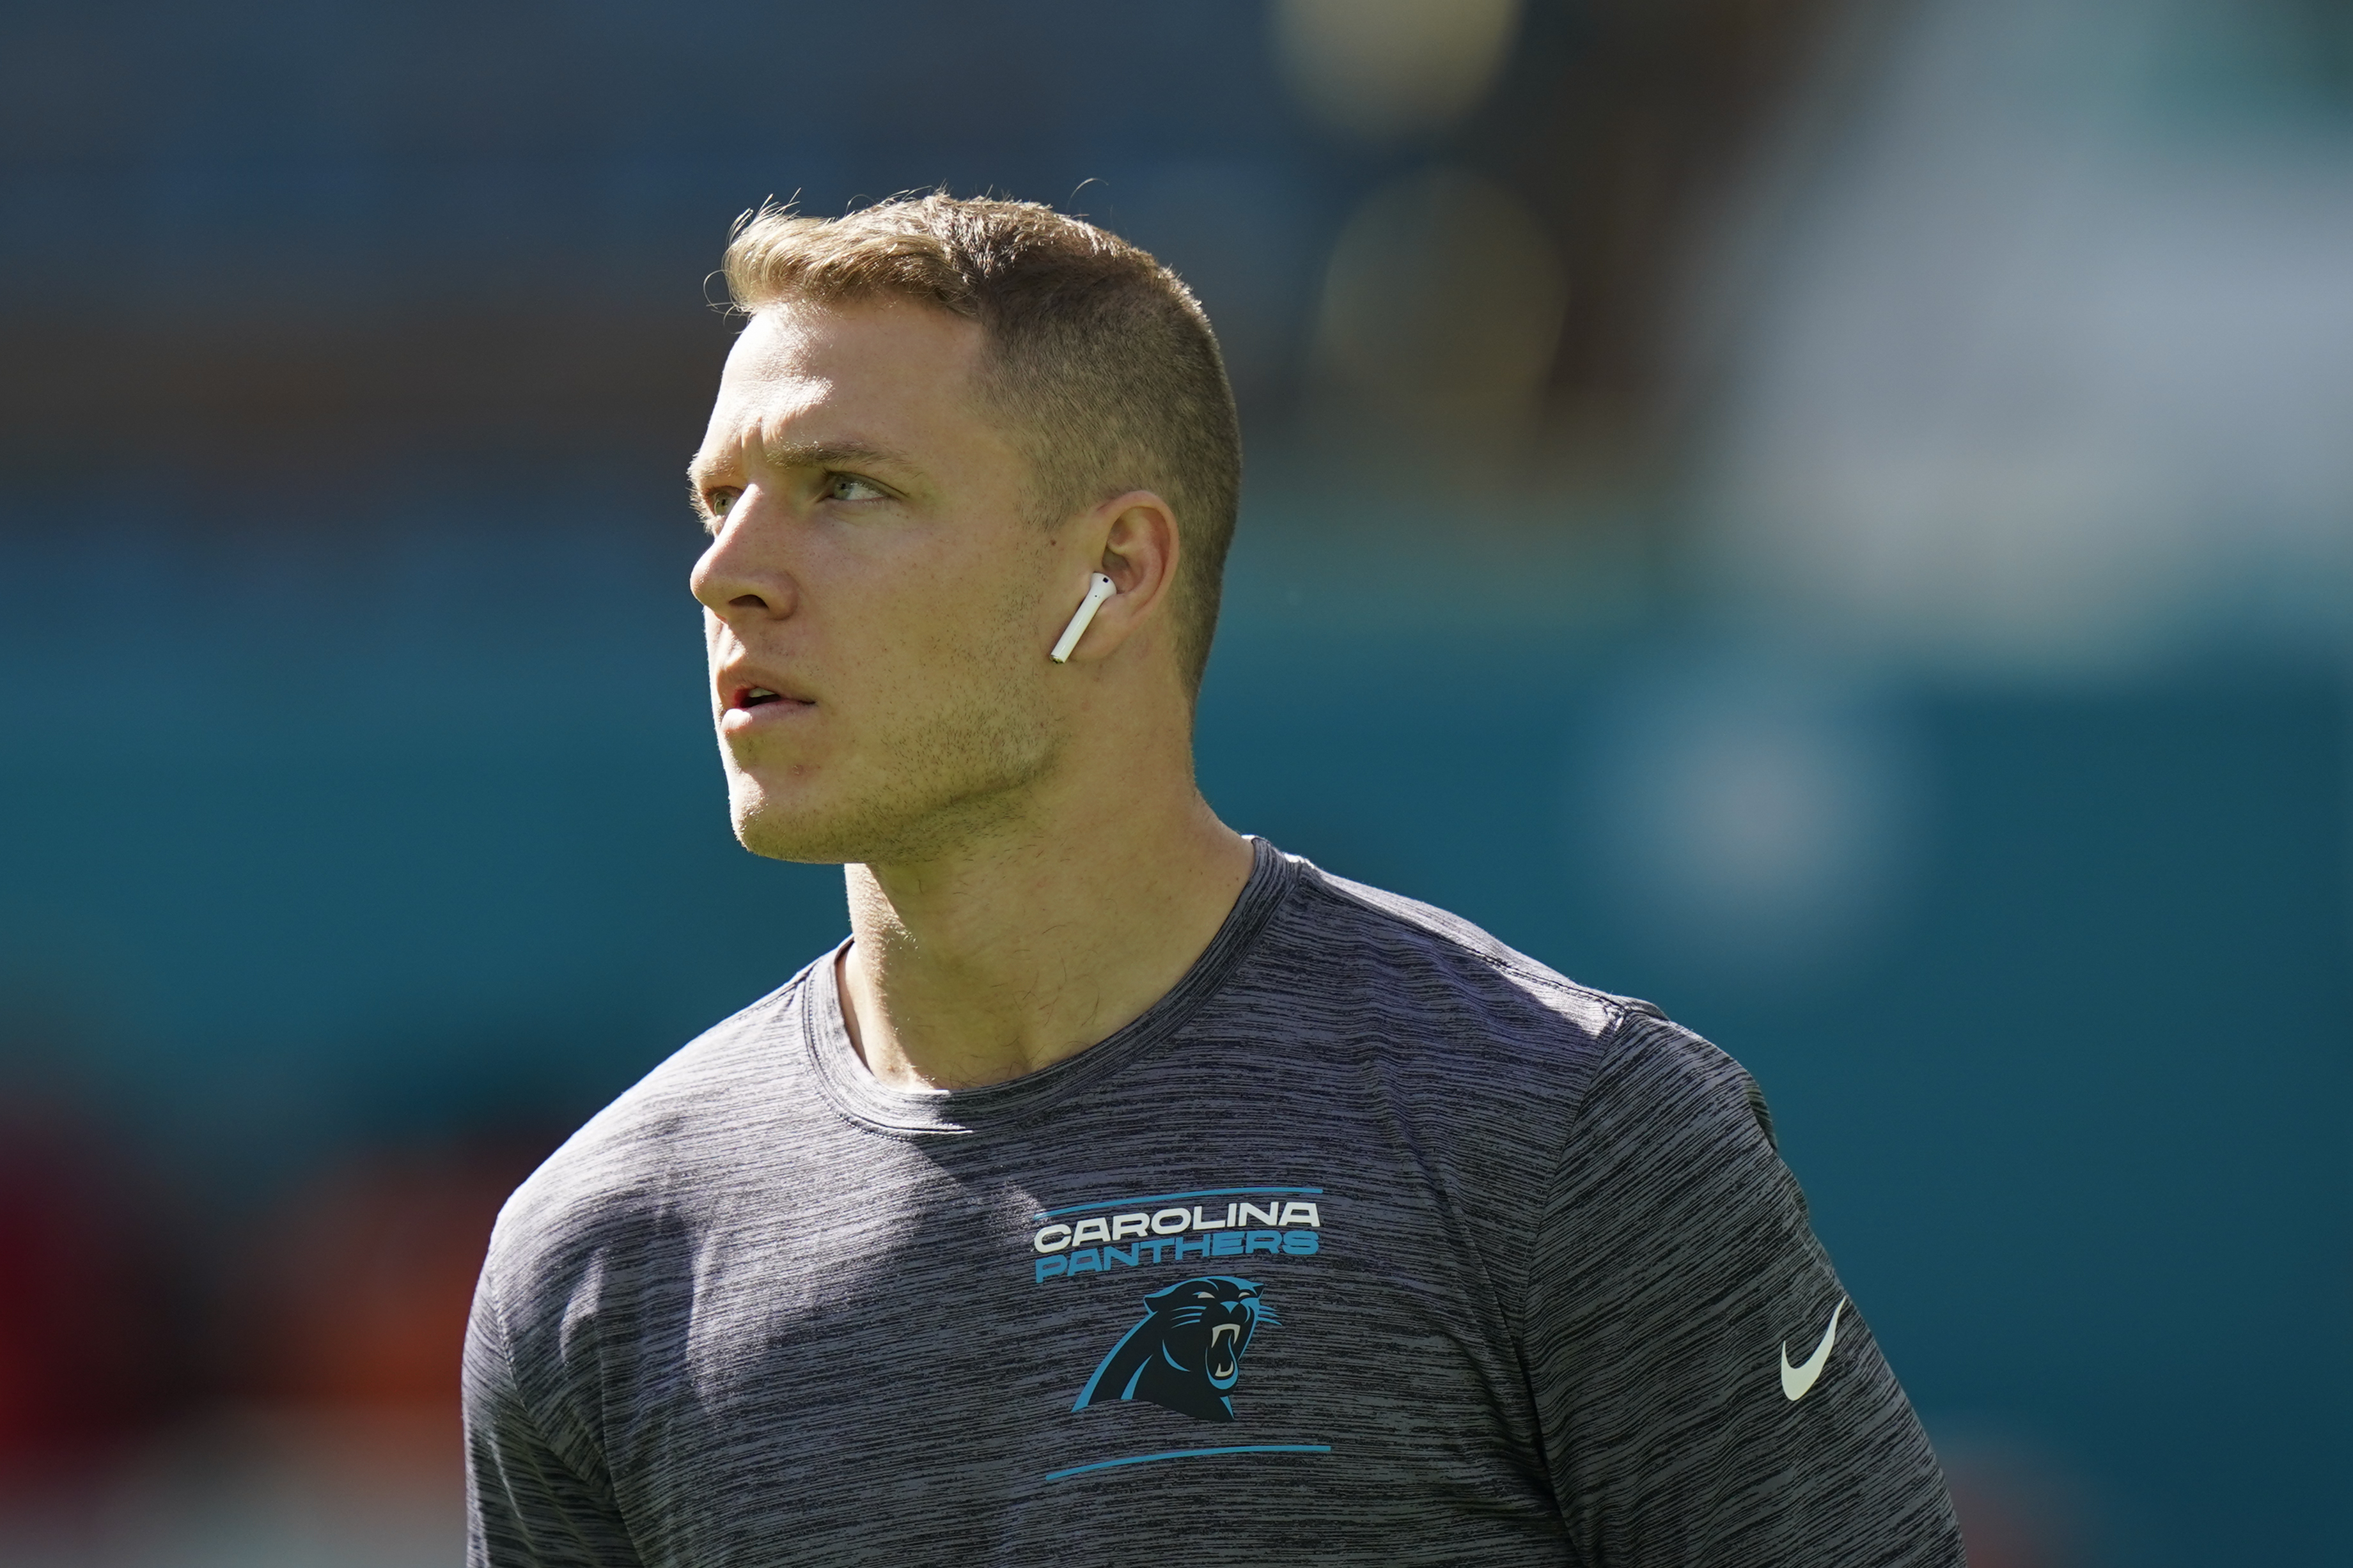 Christian McCaffrey Out for Season After Being Placed on IR with Ankle Injury